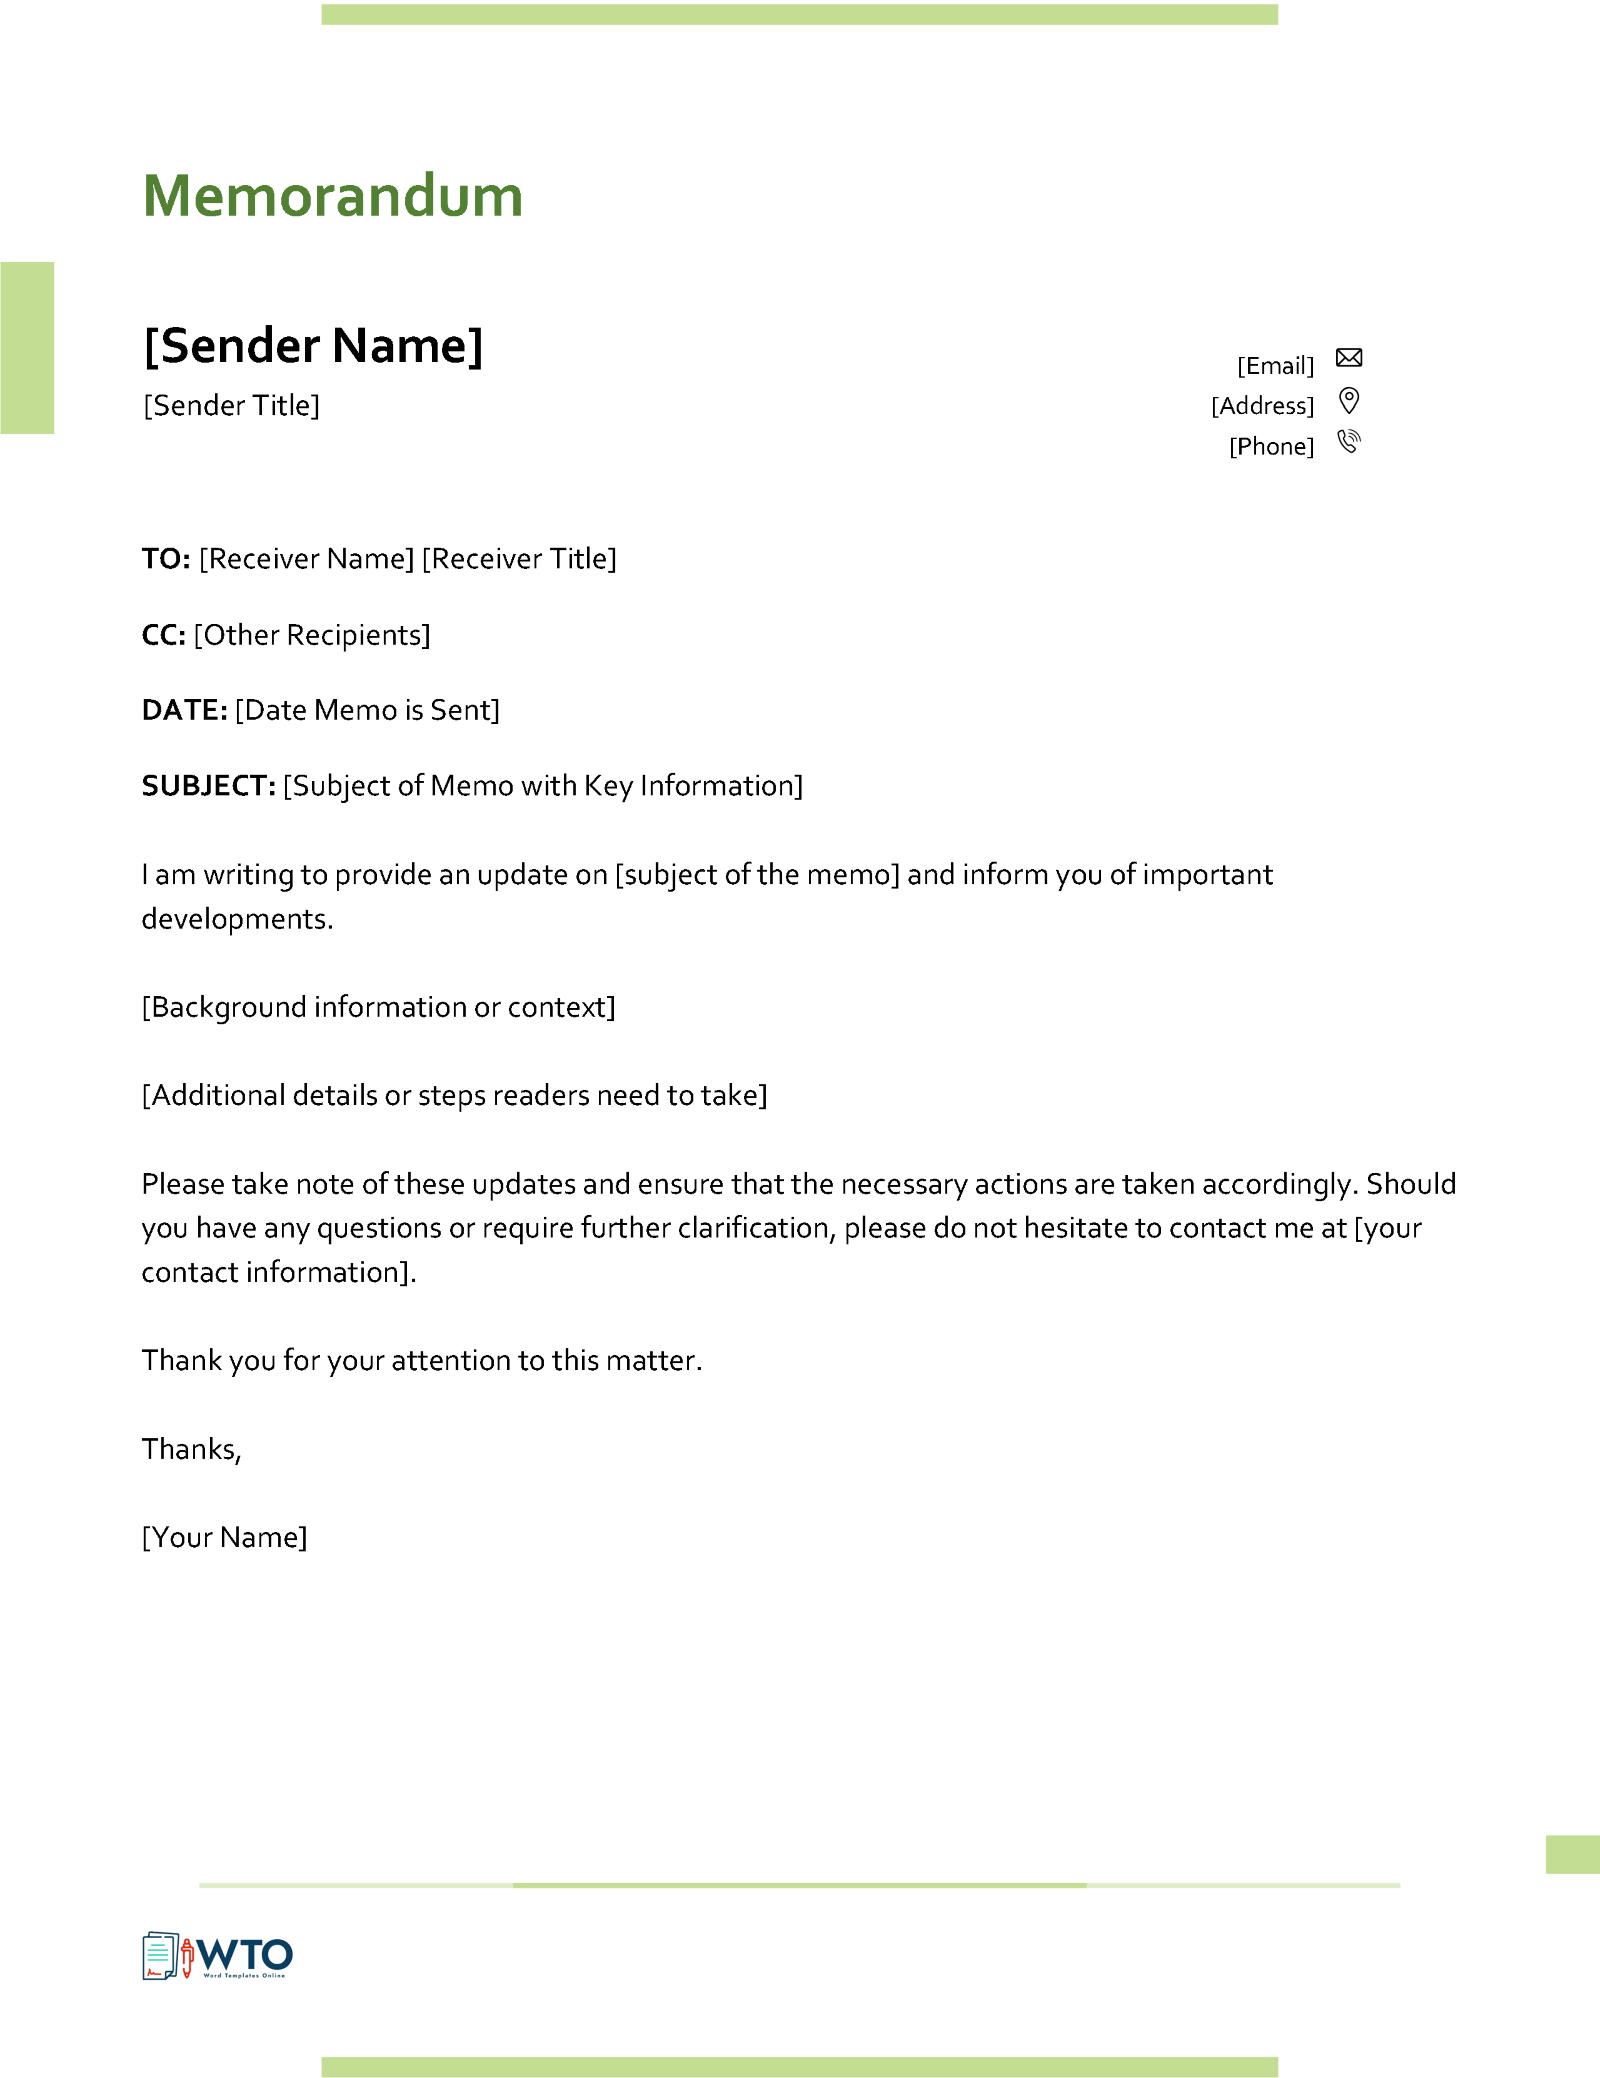 Memo Template for Business Use